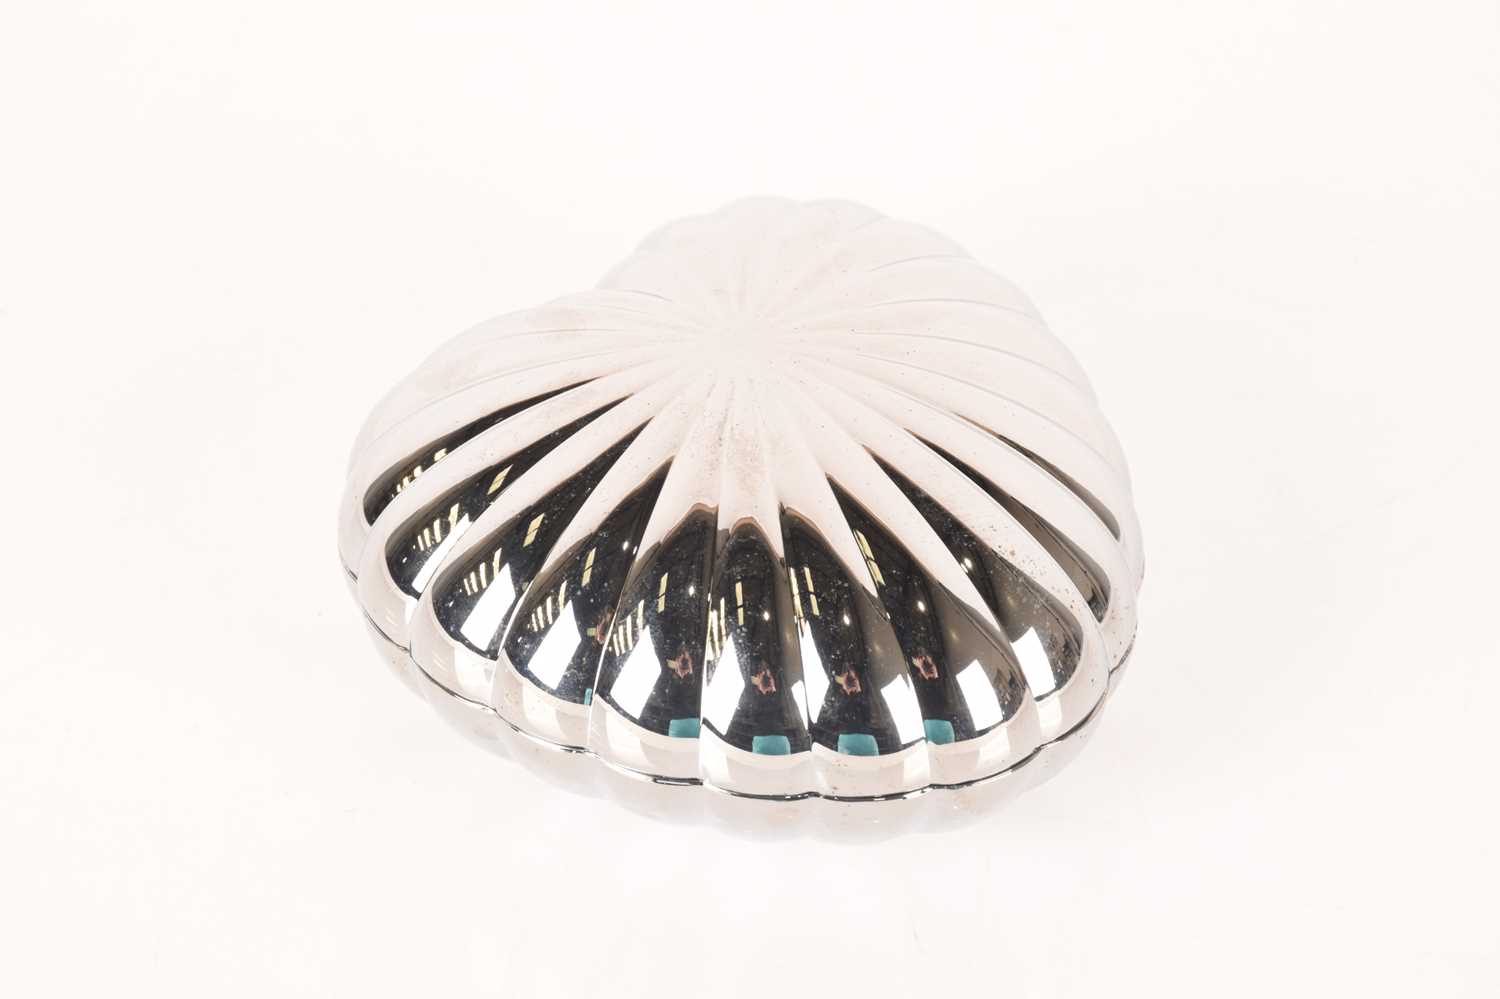 A Georg Jensen Heart Bonbonniere from the Legacy collection, in the original box.